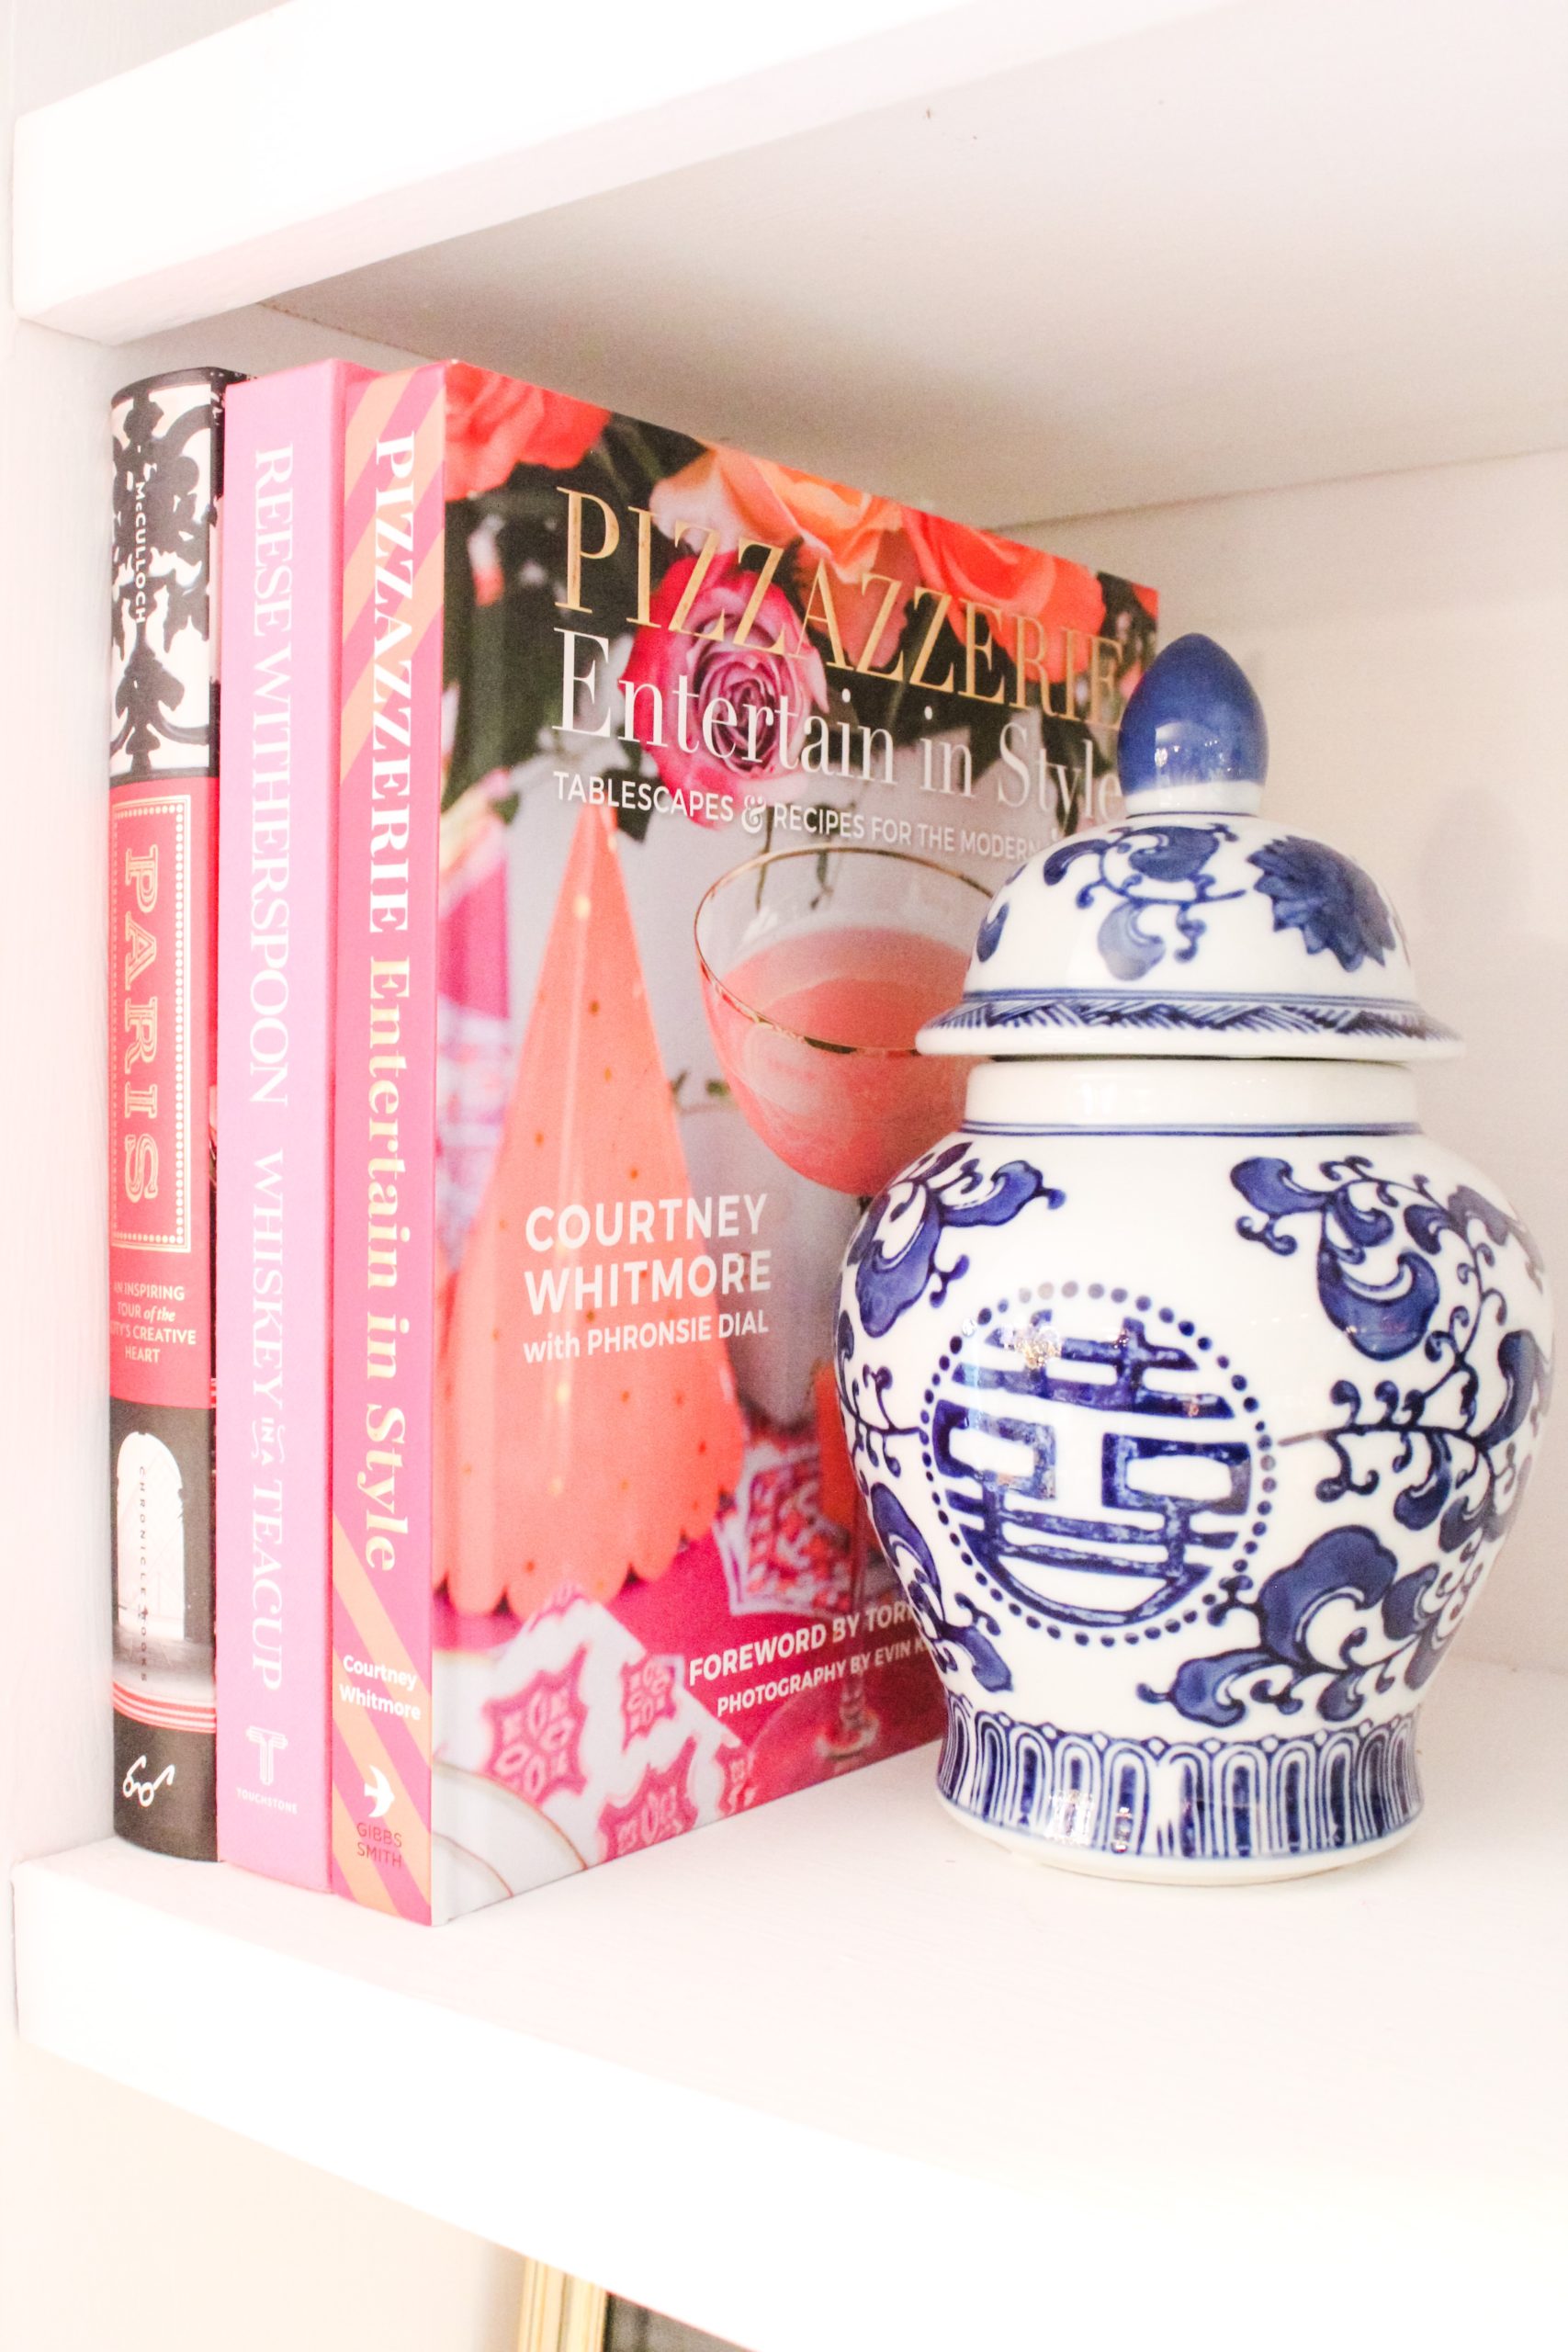 dior and chanel books decor set pink